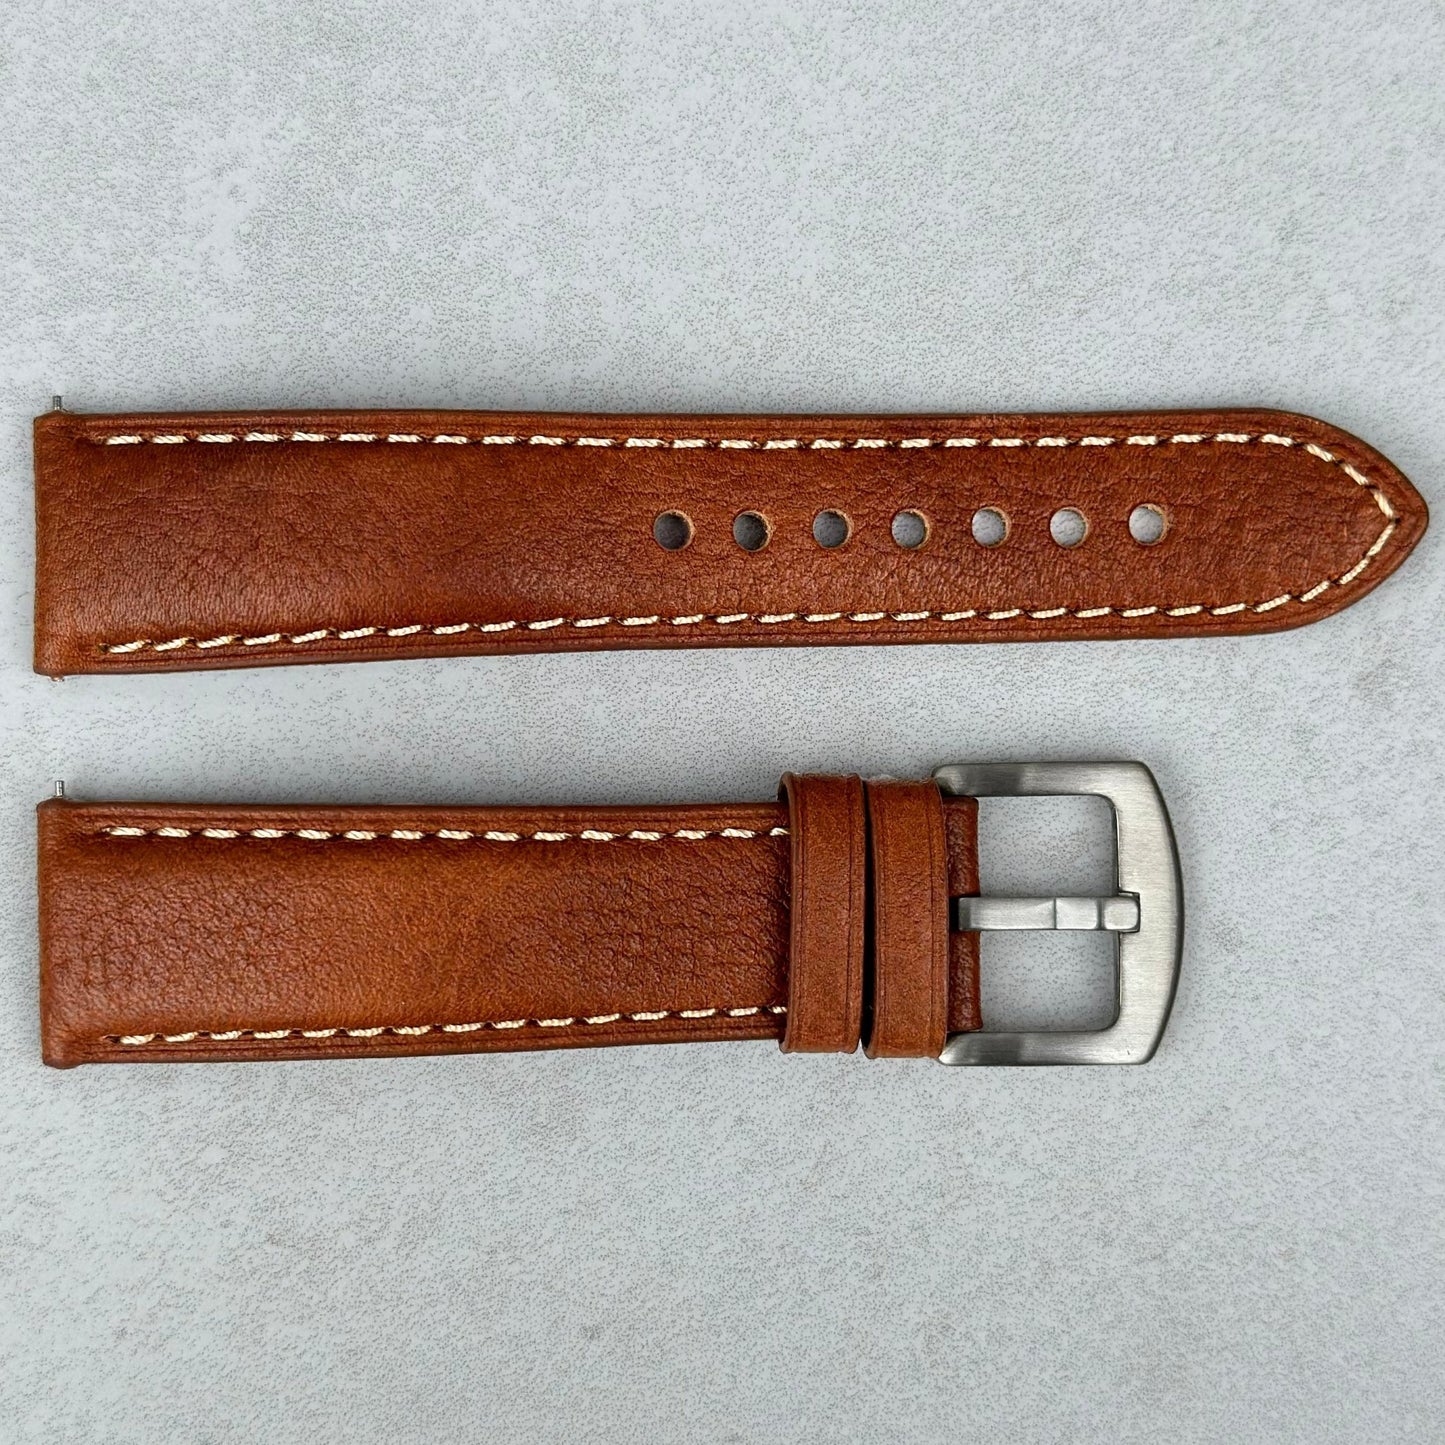 Rome copper tan Italian leather watch strap with contrast ivory stitching. 18mm, 20mm, 22mm, 24mm. Watch And Strap